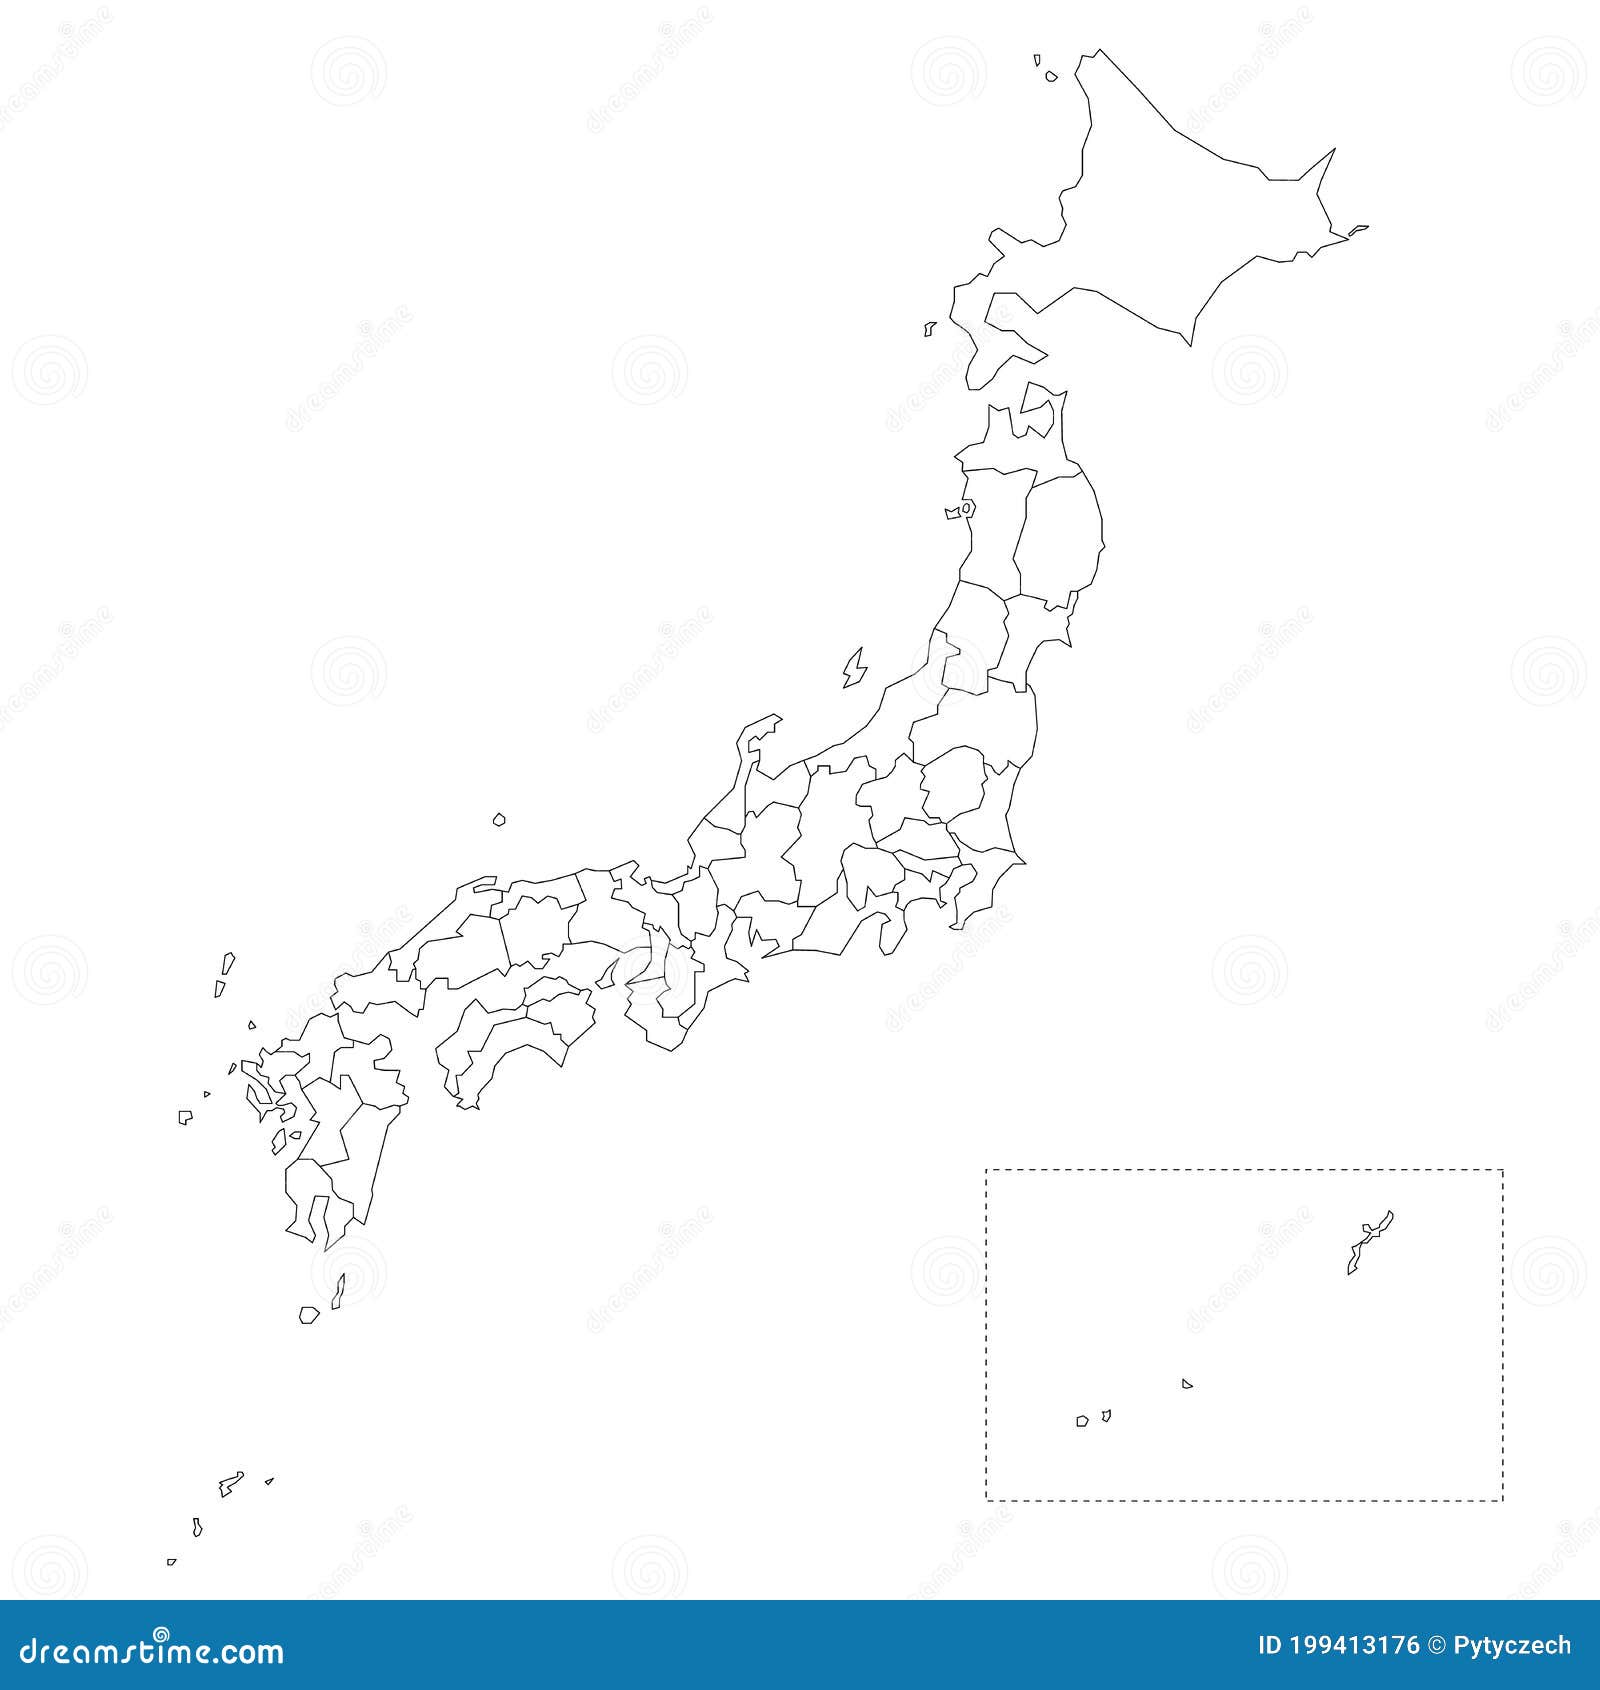 Japan Prefectures Map Stock Vector Illustration Of Line 199413176